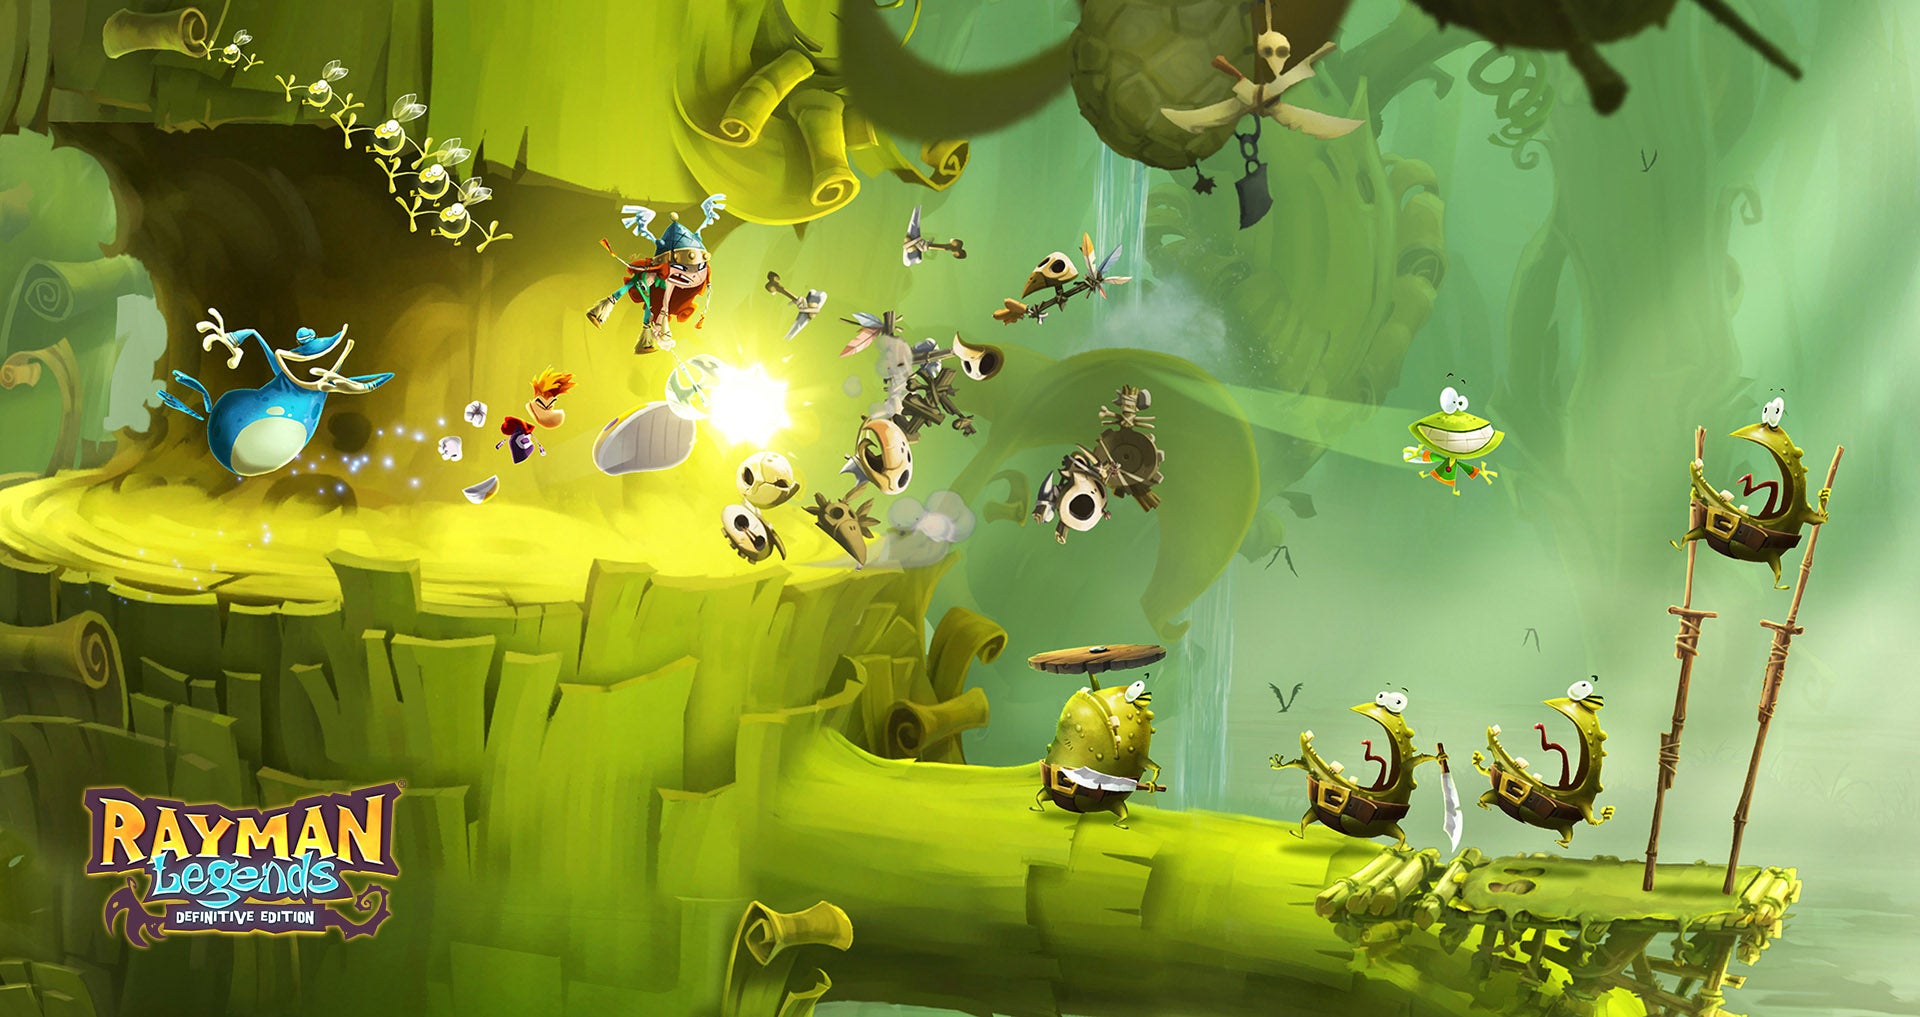 Rayman Legends game artwork with characters and logo.